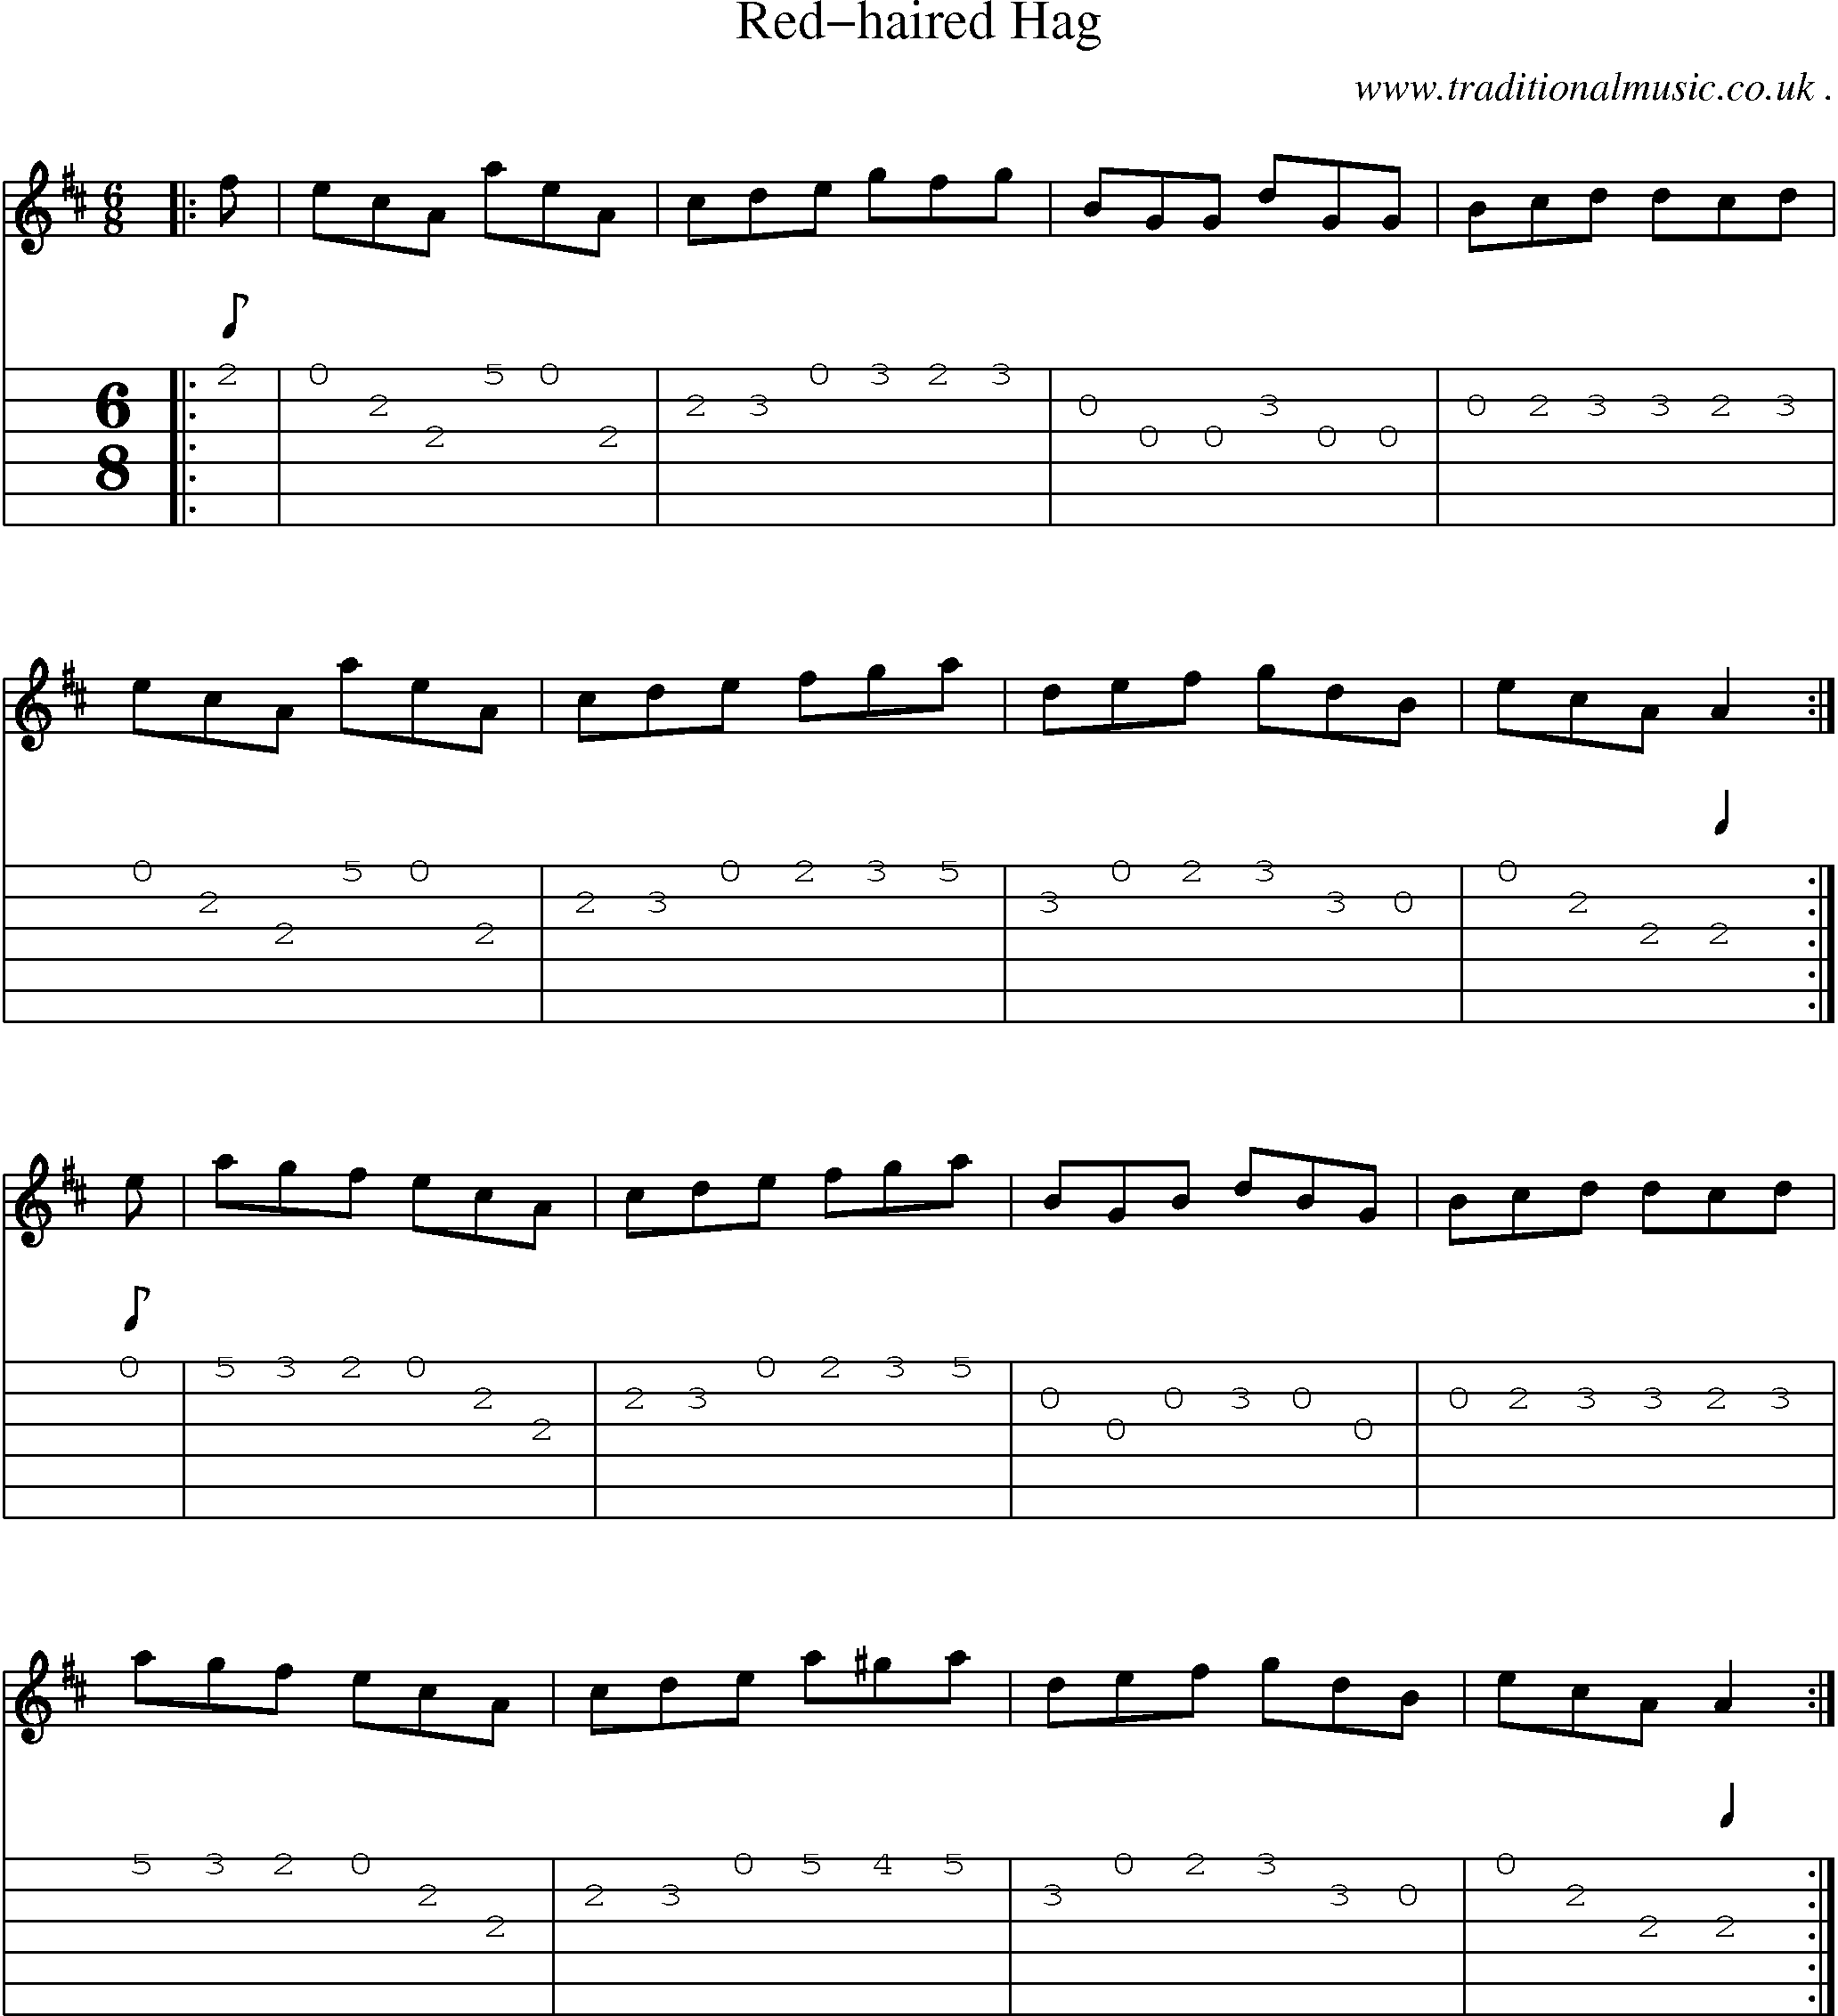 Sheet-Music and Guitar Tabs for Red-haired Hag